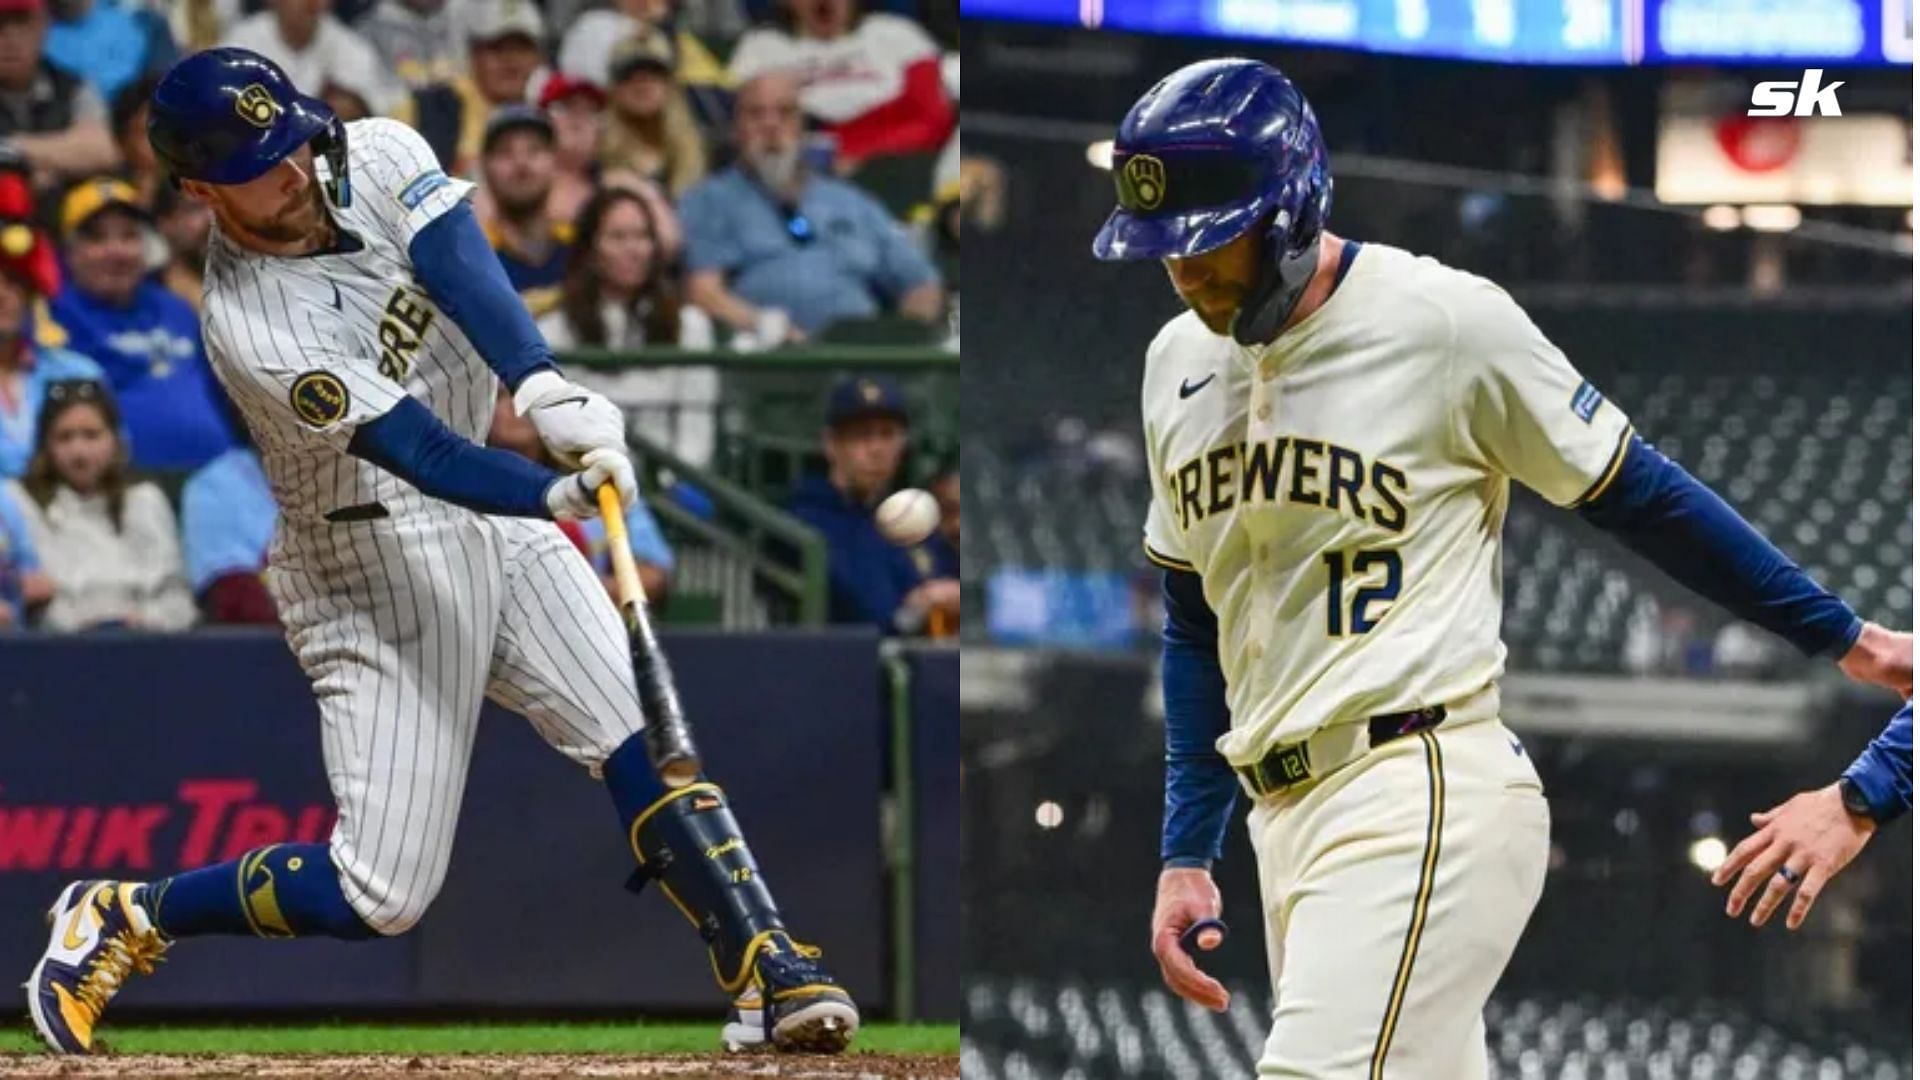 Rhys Hoskins Injury Update: Brewers star first baseman placed on 10-day IL with right hamstring strain